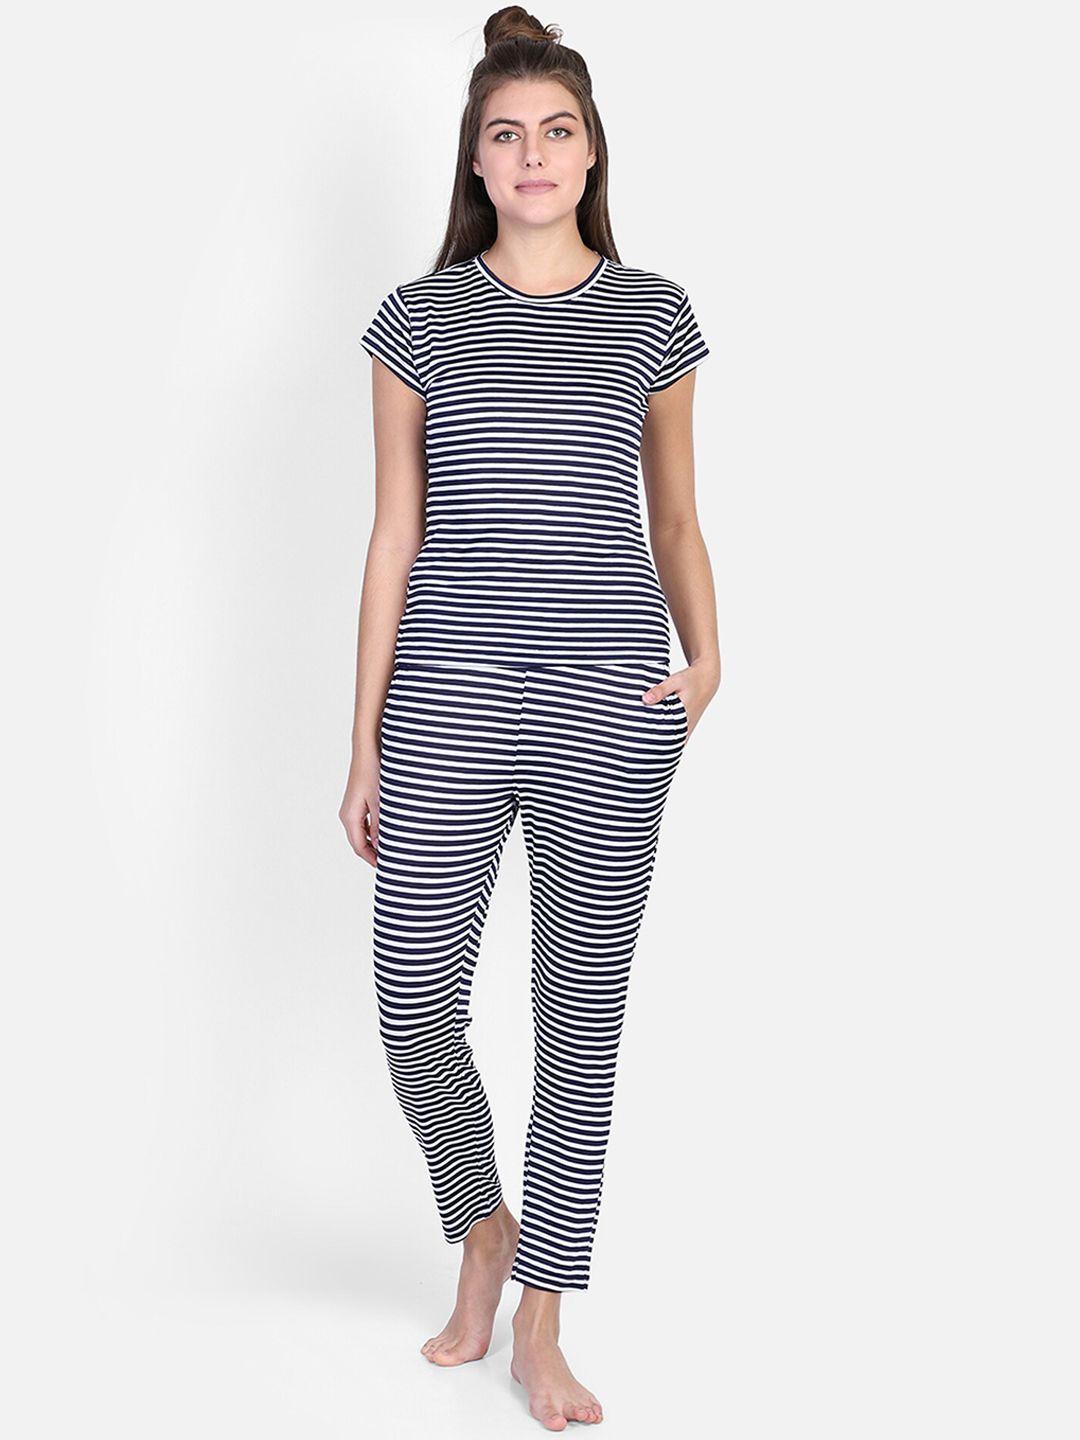 proteens women navy blue & white striped night suit